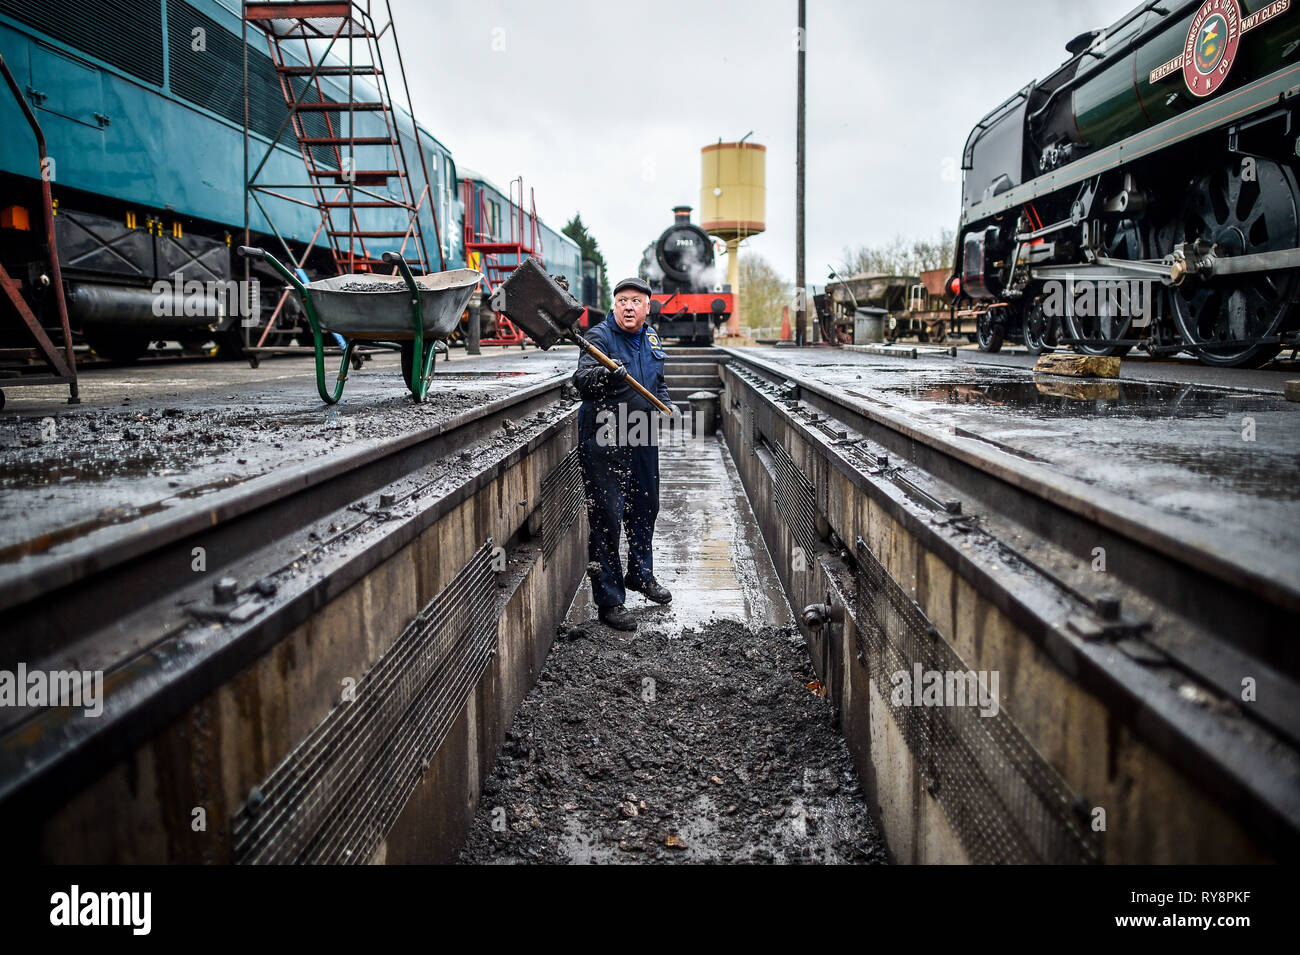 An engineer shovels ash from a locomotive firebox inside an inspection pit as locomotives are prepared for service at Gloucestershire Warwickshire Steam Railway station at Toddington, where a special heritage steam express train service is taking race goers to Cheltenham. Stock Photo